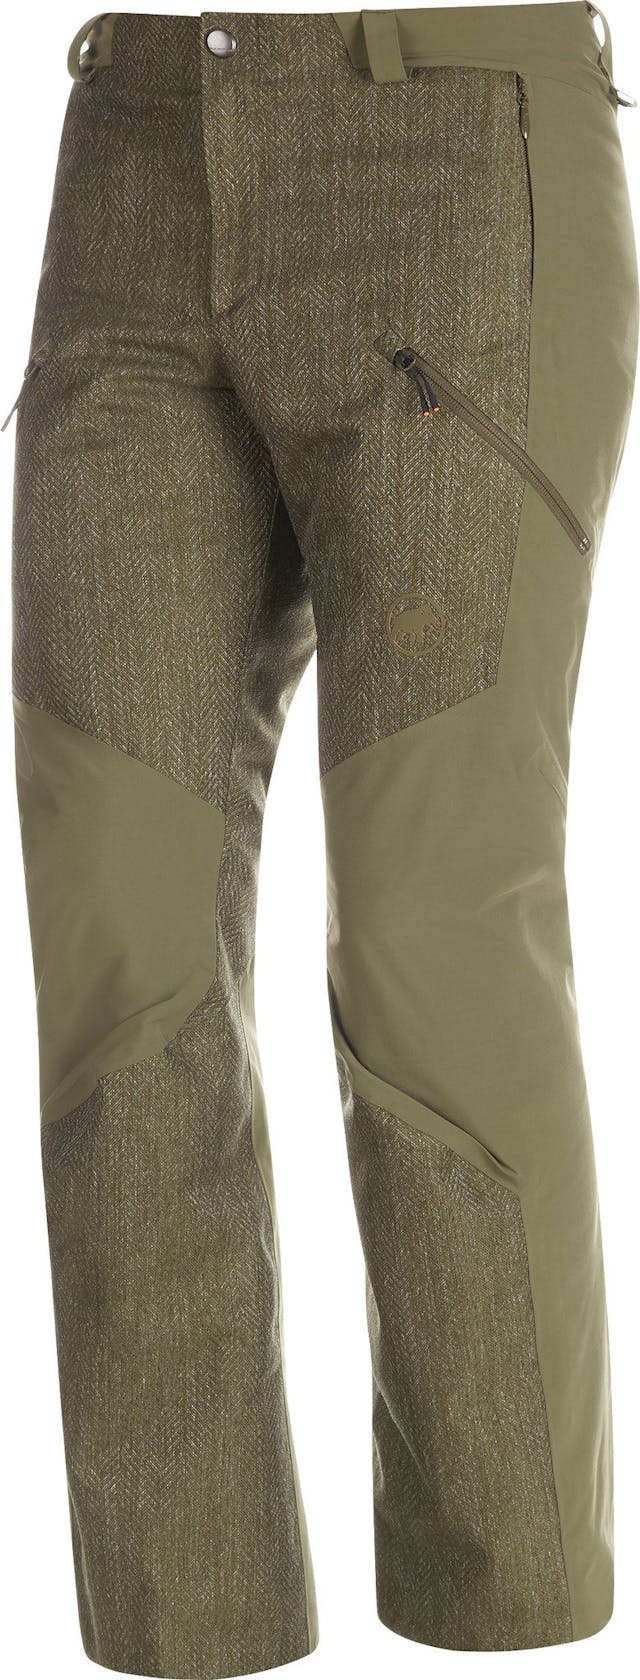 Product image for Cambrena HS Thermo Pants - Men's